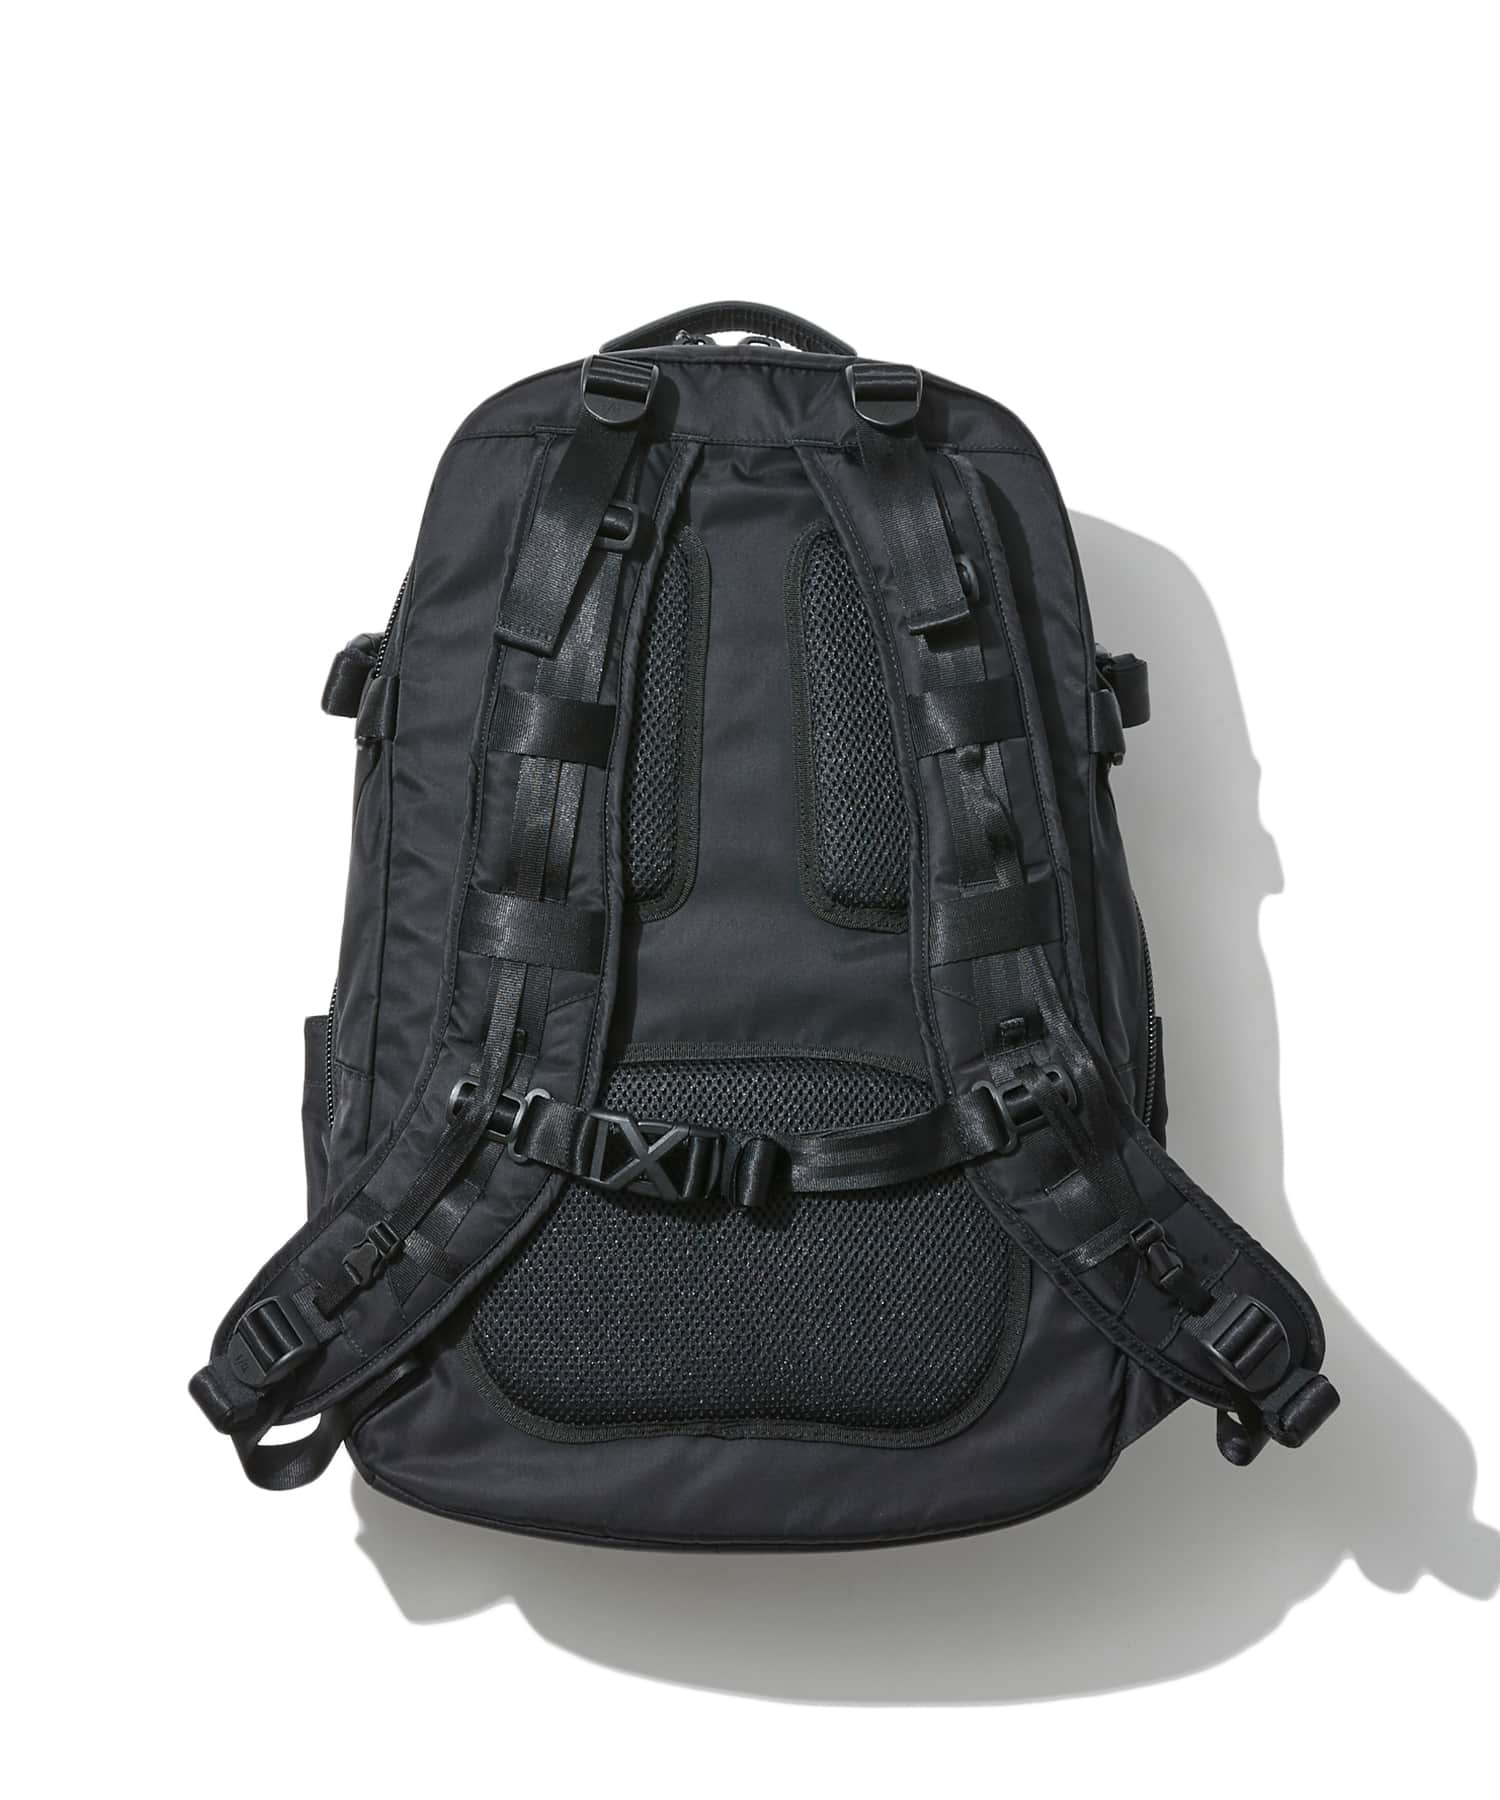 F/CE. RECYCLE TWILL TYPE A TRAVEL BACKPACK